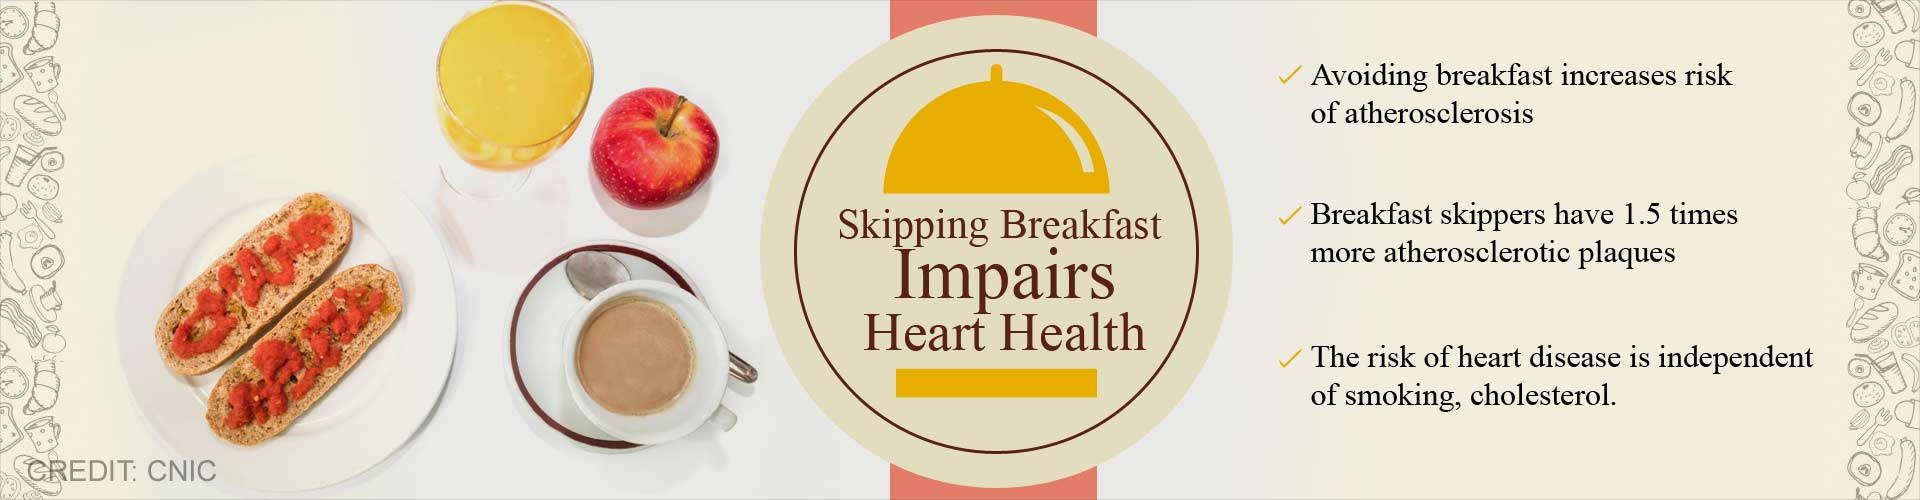 Skipping breakfast impairs heart health
- Avoiding breakfast increases risk of atherosclerosis
- Breakfast skippers have 1.5 times more atherosclerotic plaques
- The risk of heart disease is independent of smoking, cholesterol